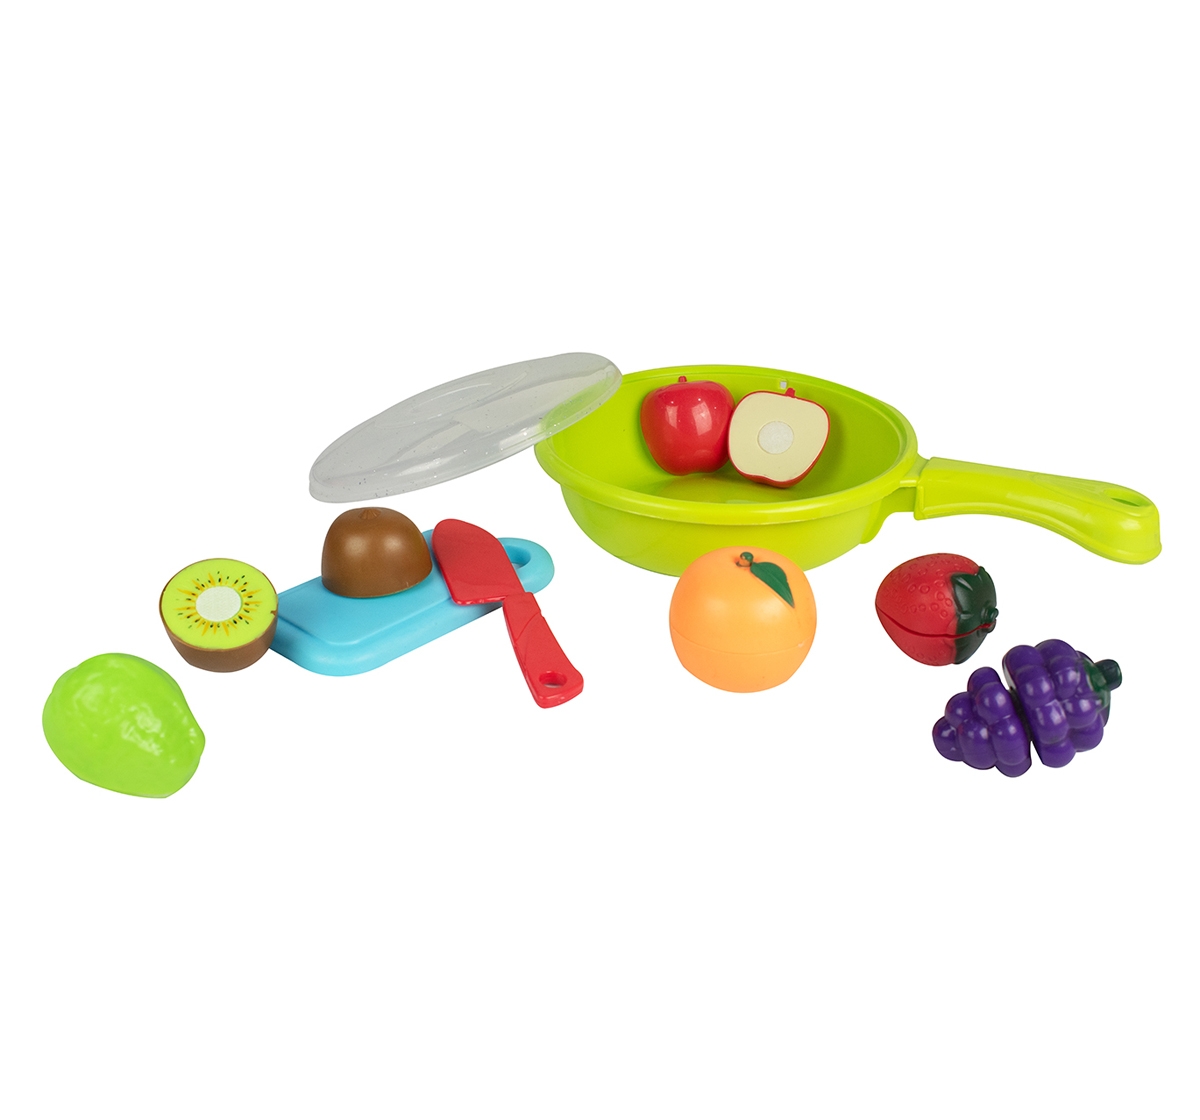 Kingdom Of Play | Kingdom Of Play Fruit set with Pan and 10 Pieces of different cut fruits Multicolor 3Y+